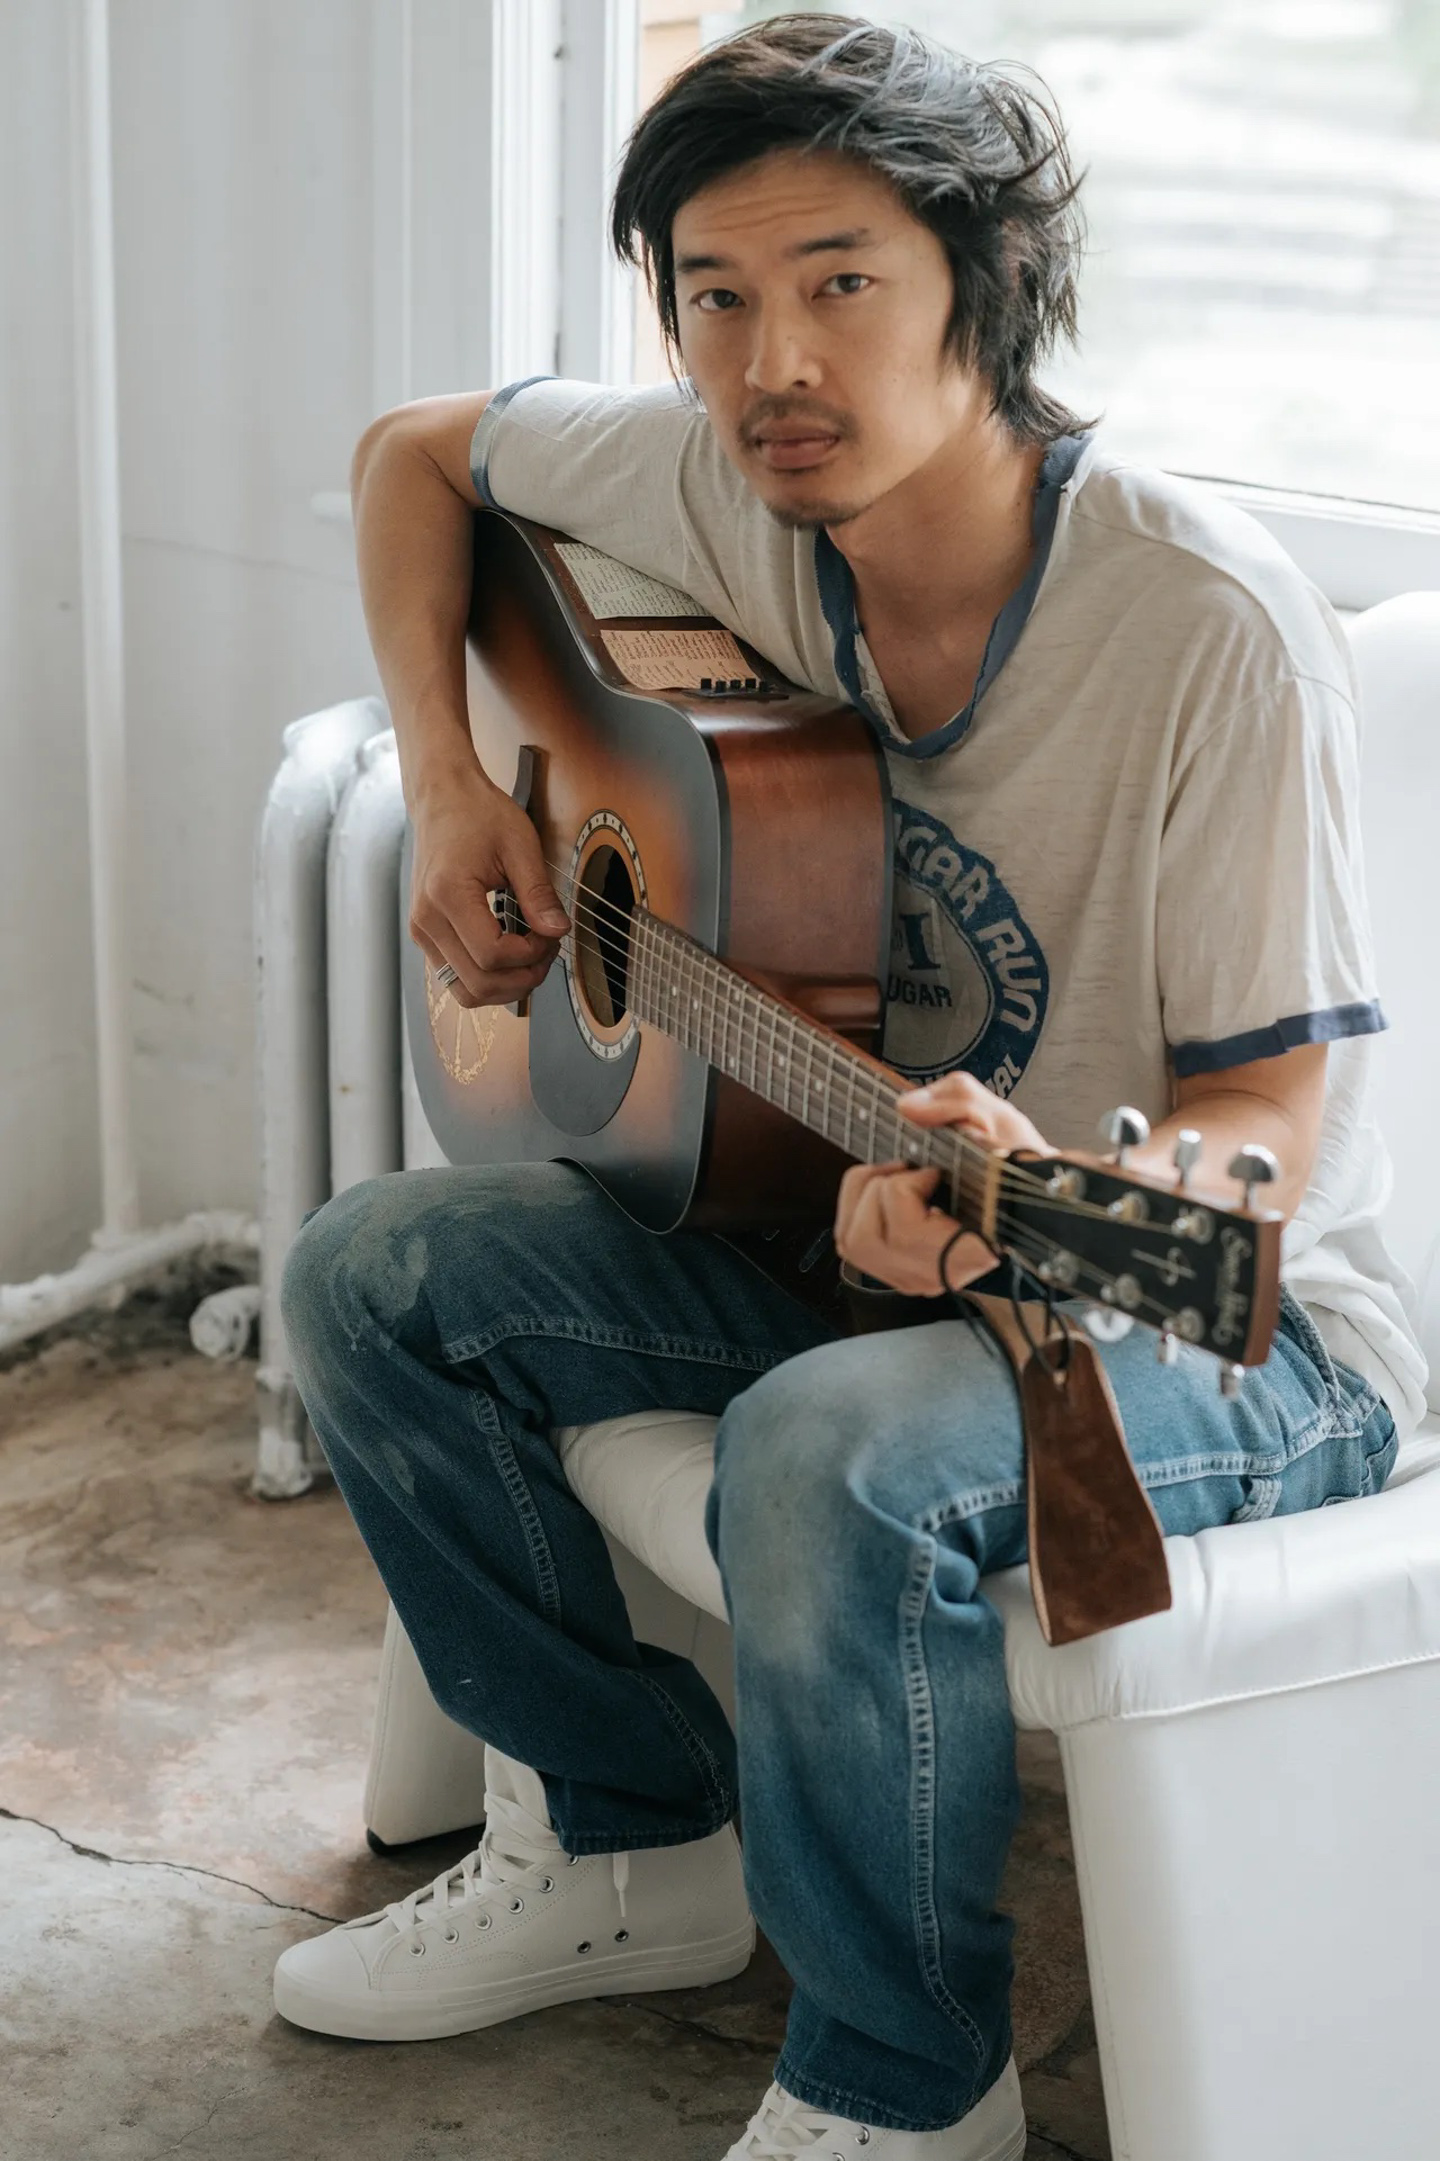 Portrait of Daniel Lew, sitting in a chair holding a brown guitar.